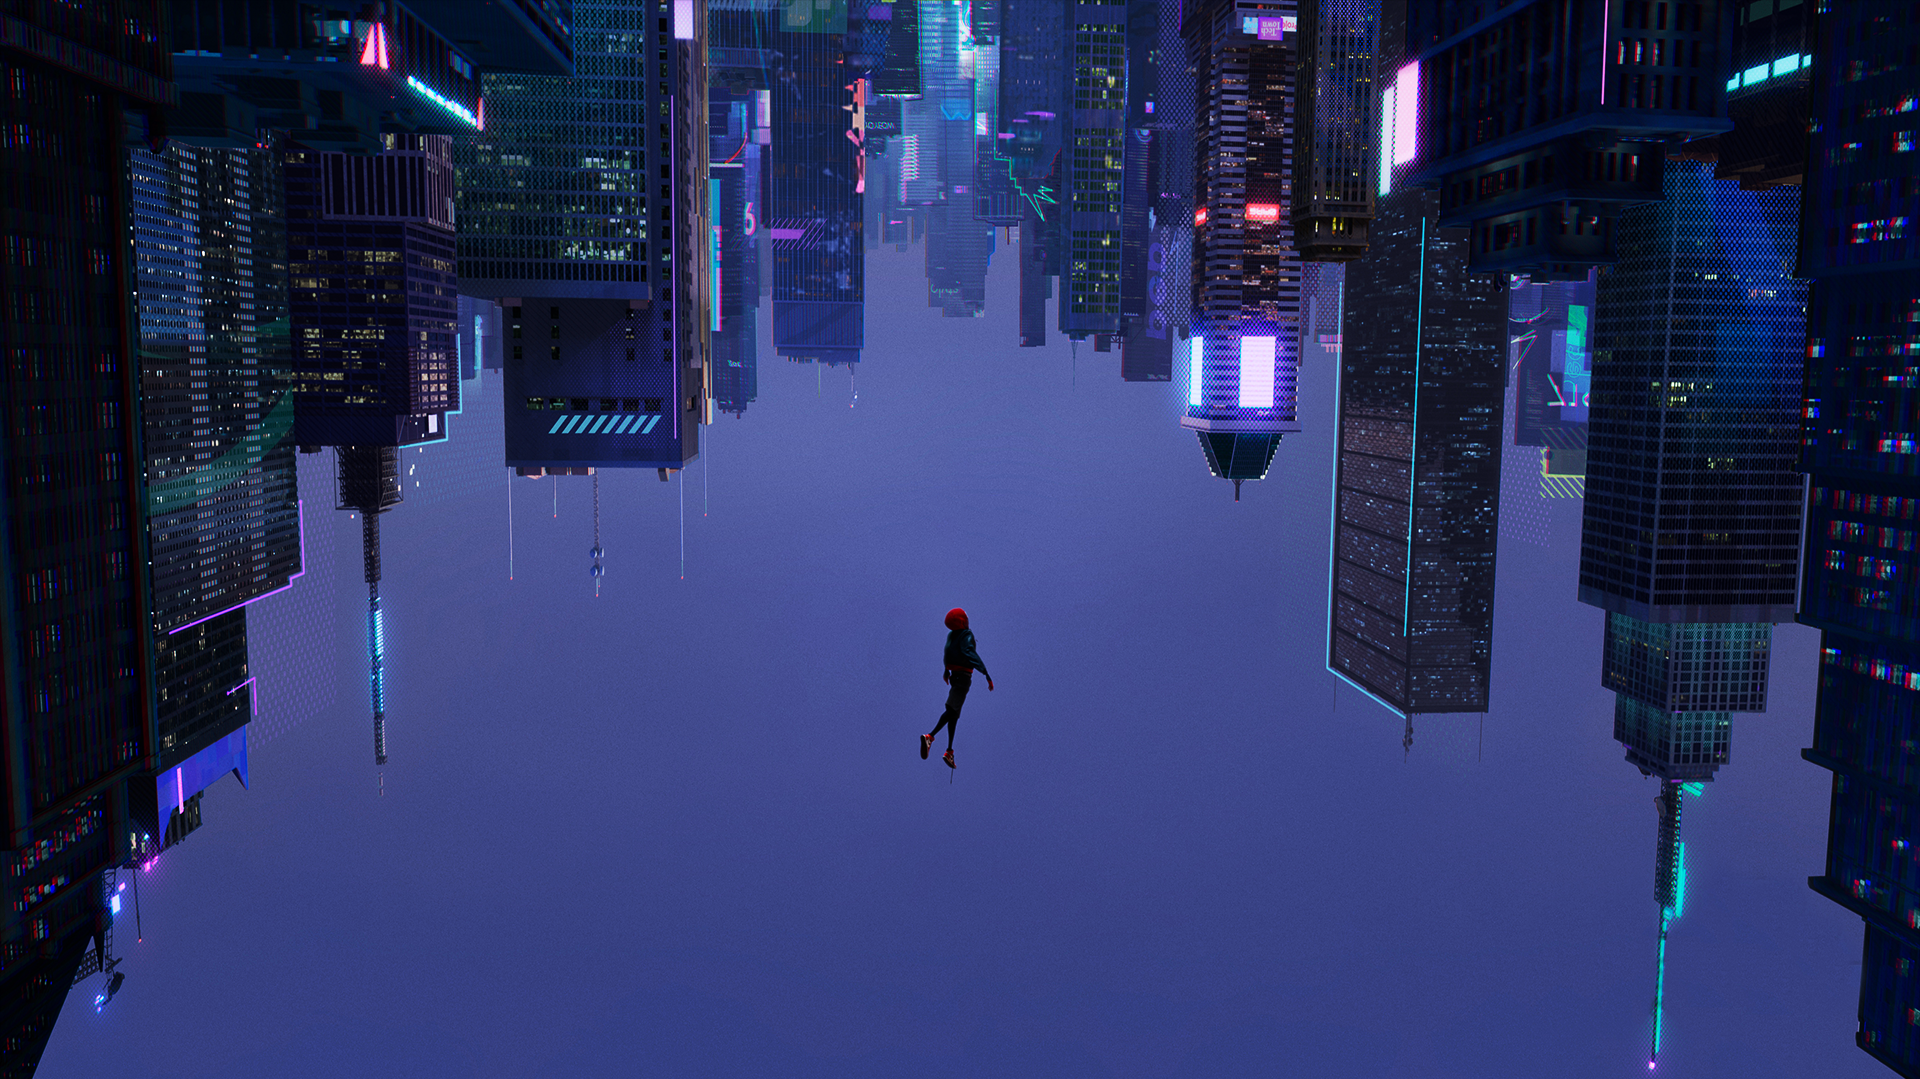 Spider Man Into The Spider Verse Full HD 1080p Wallpaper 1920x1080